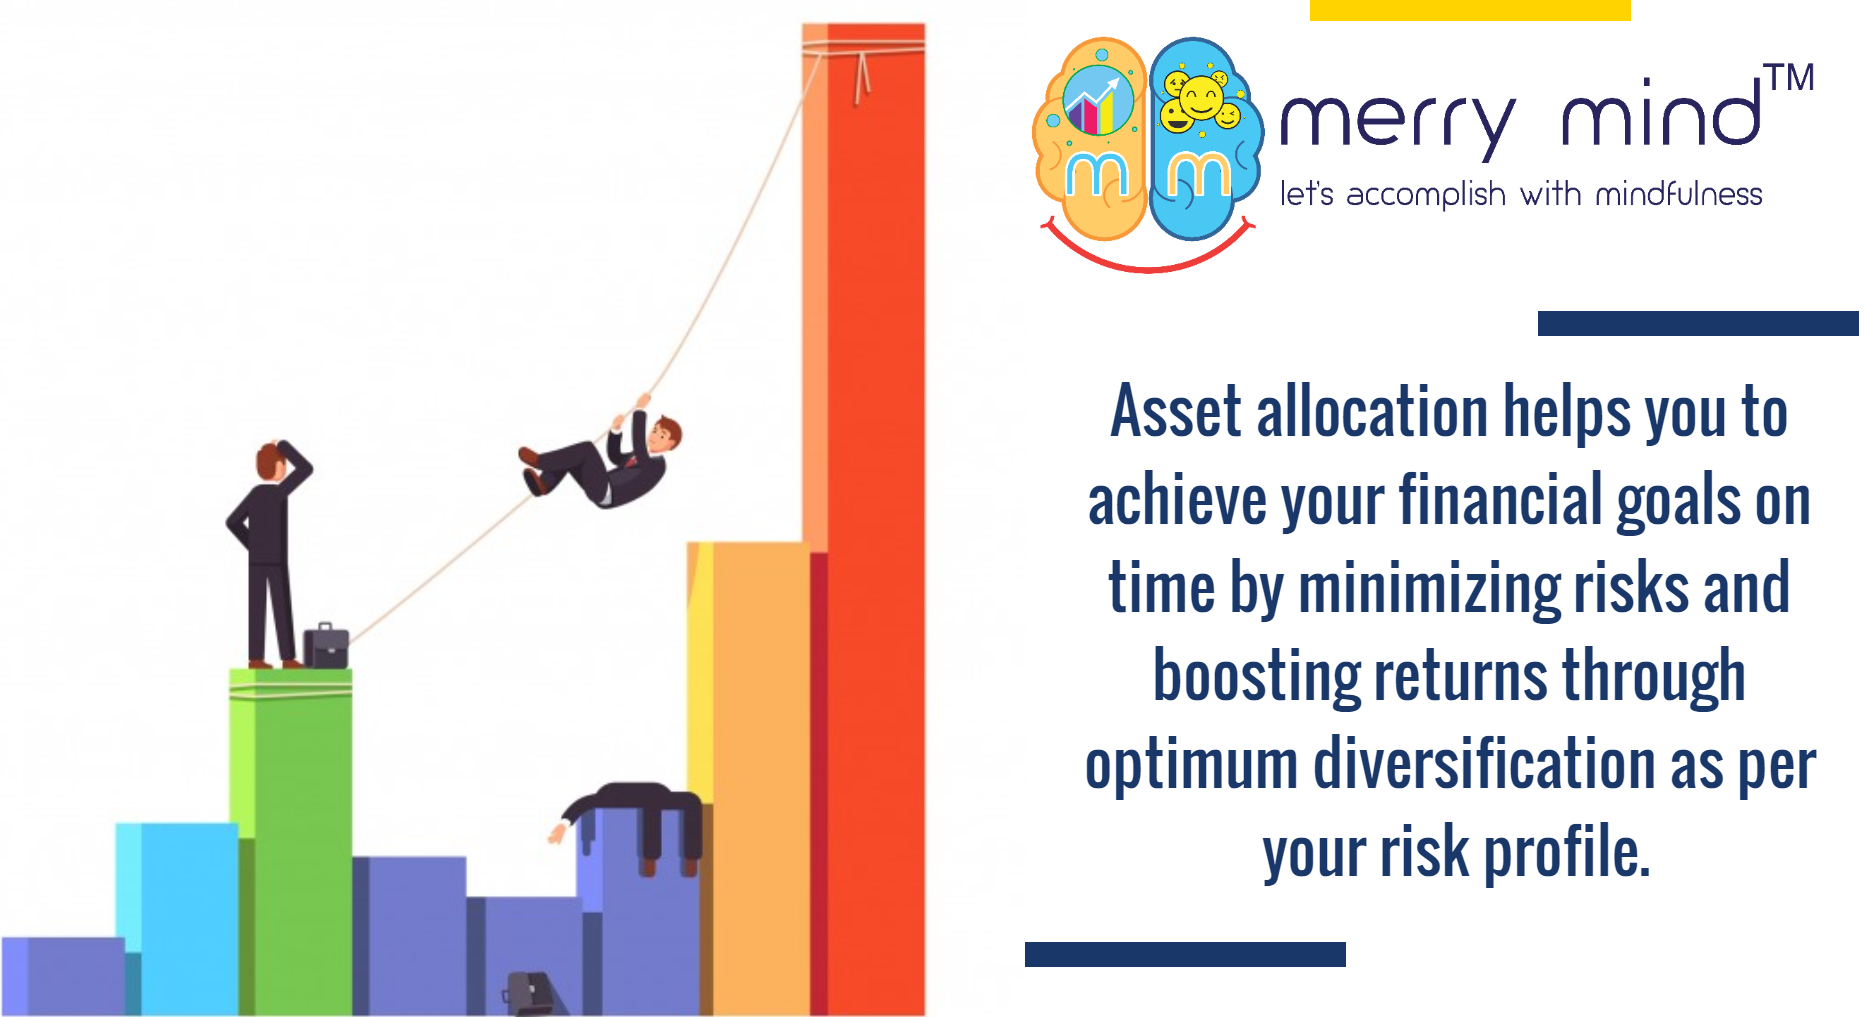 Financial Advisor will develop asset allocation strategies for you to make your financial goals achievable